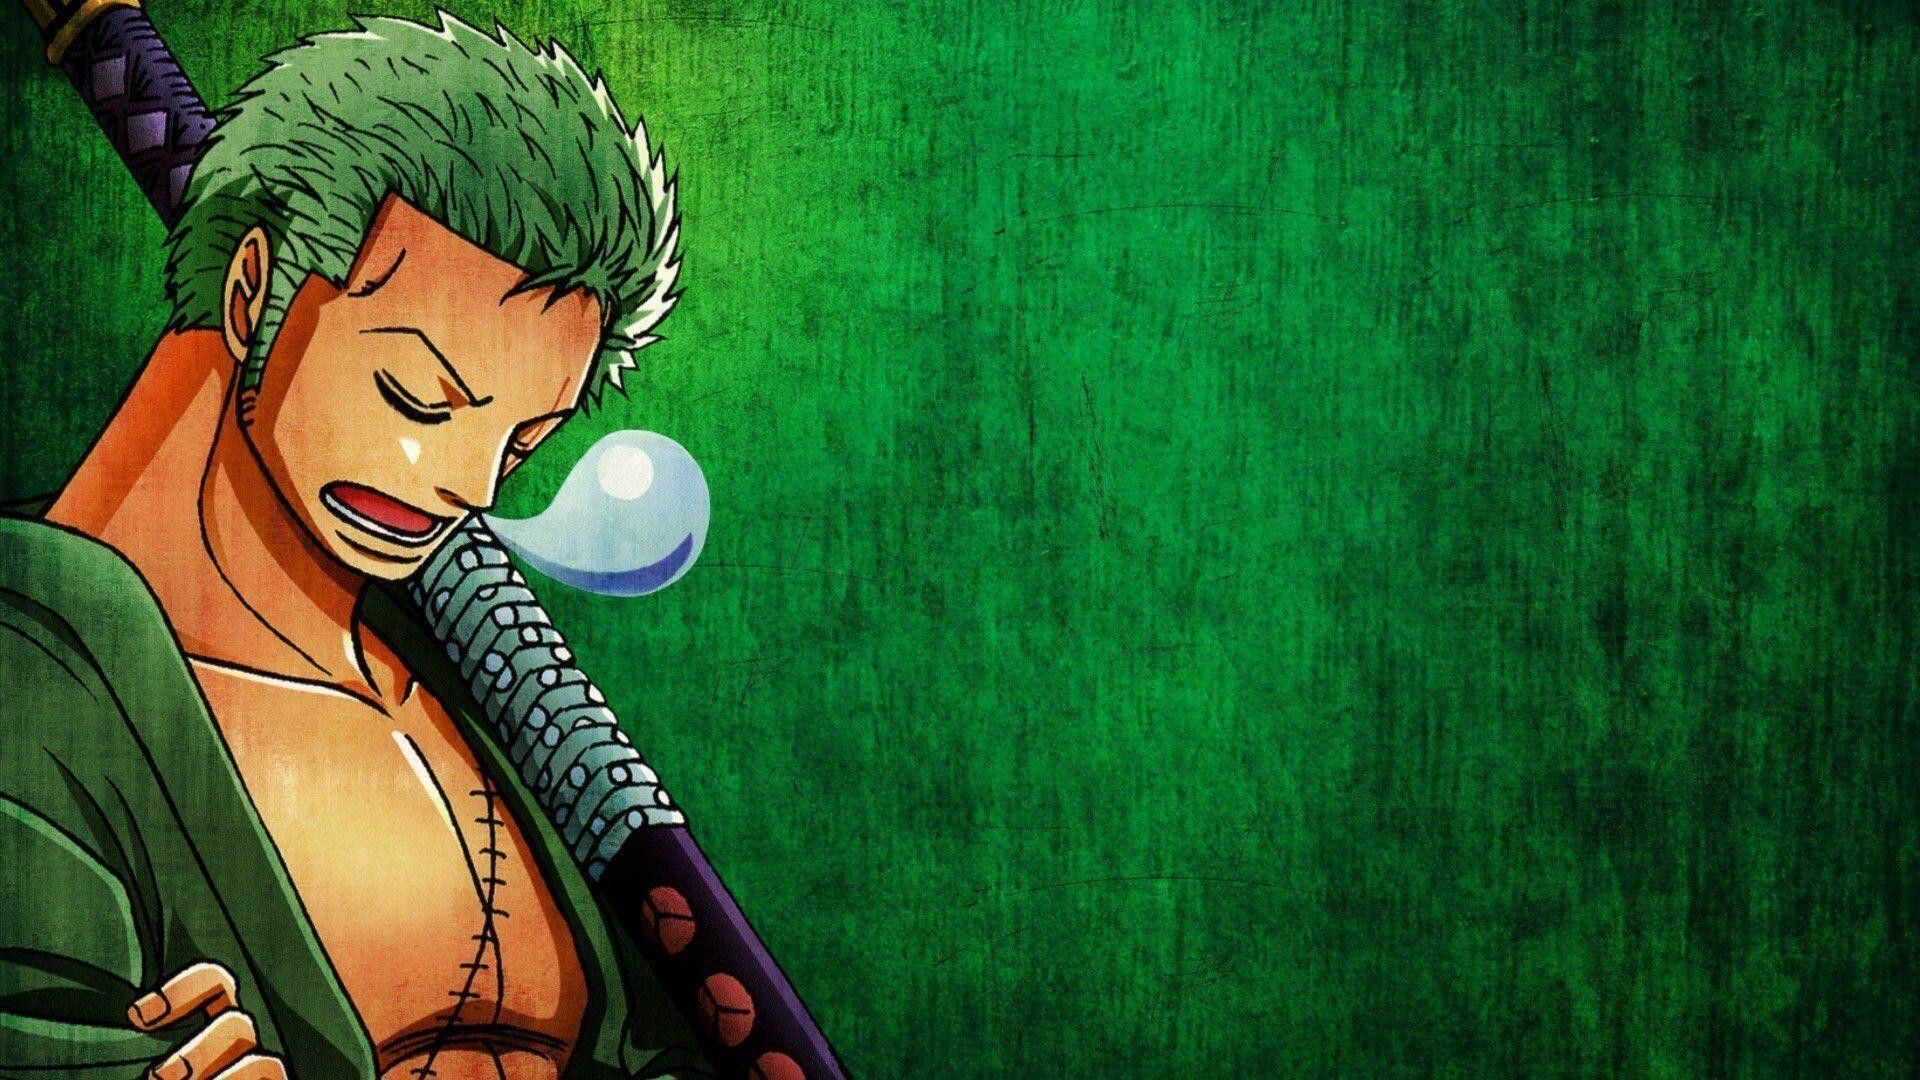 37 Zoro Hd Wallpapers Hd 4k 5k For Pc And Mobile Download Free Images For Iphone Android